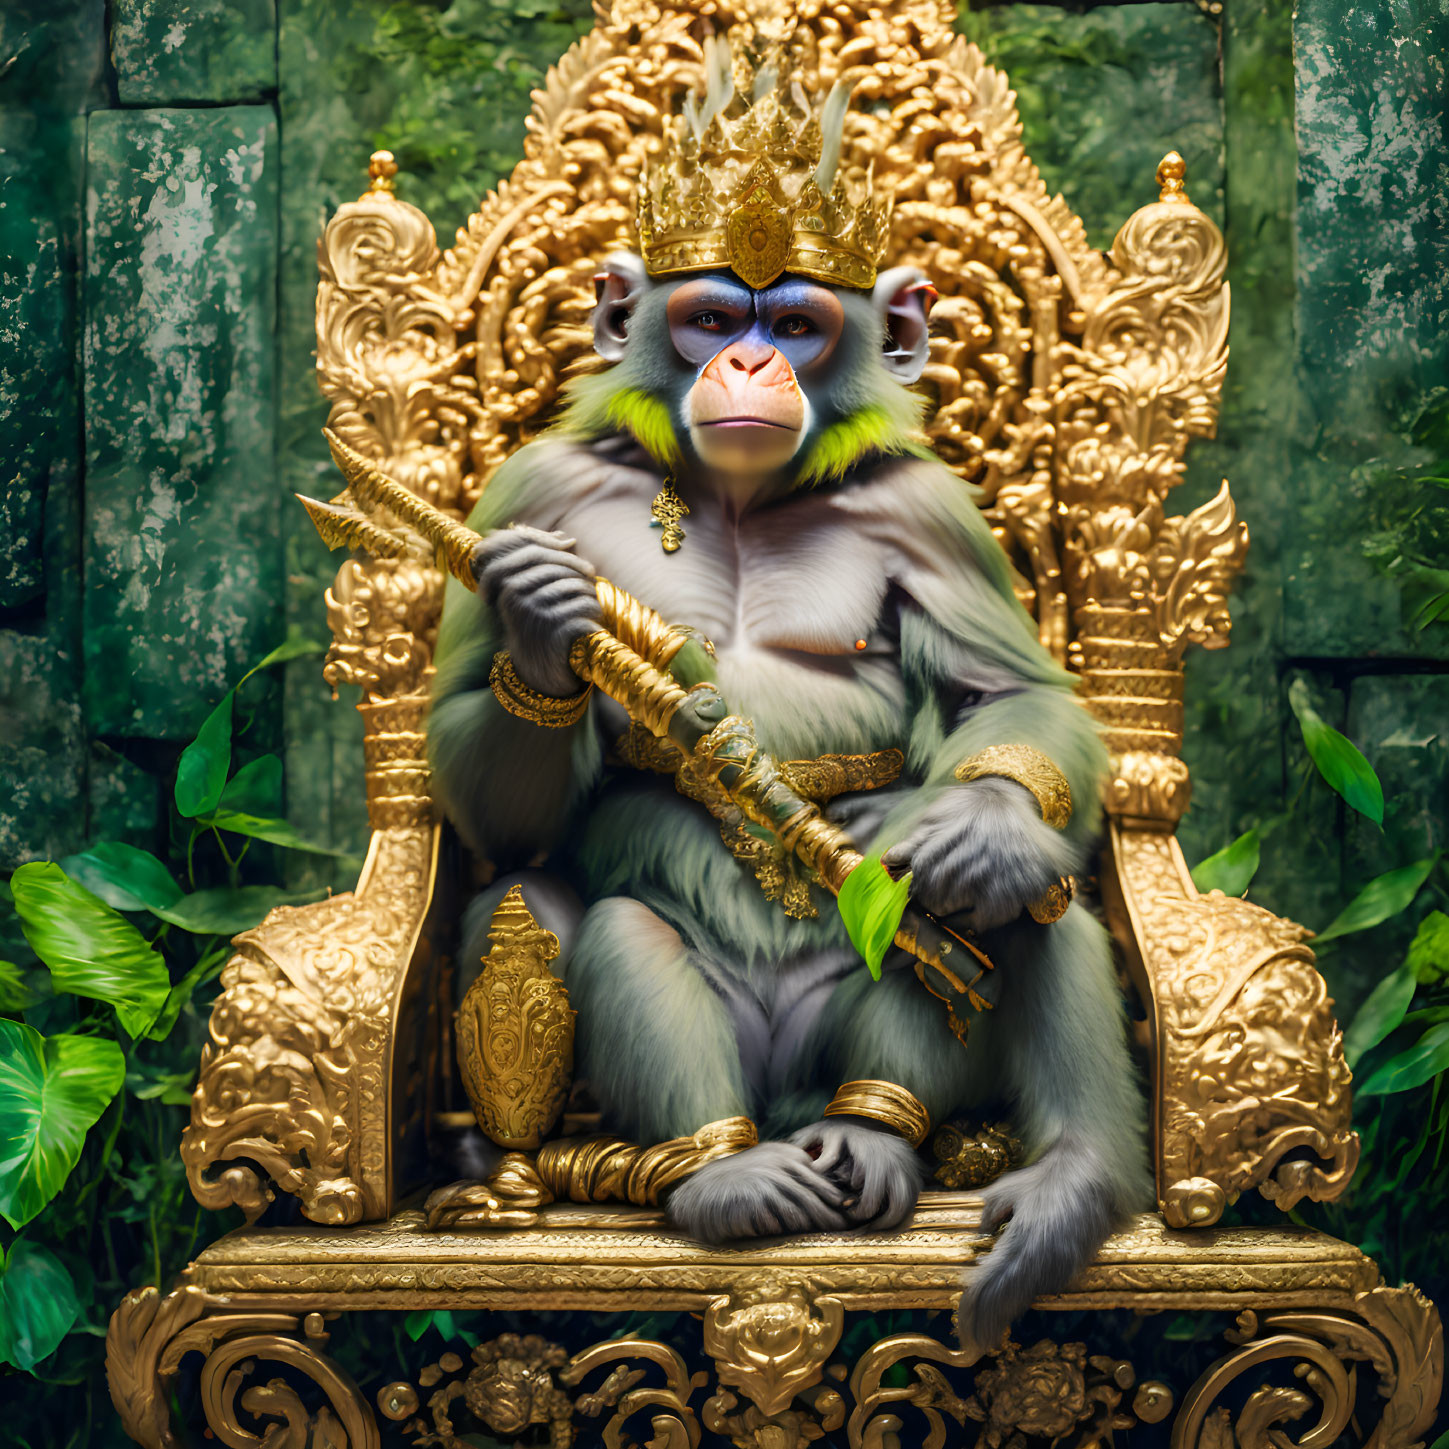  A monkey king, on a richly carved medieval throne